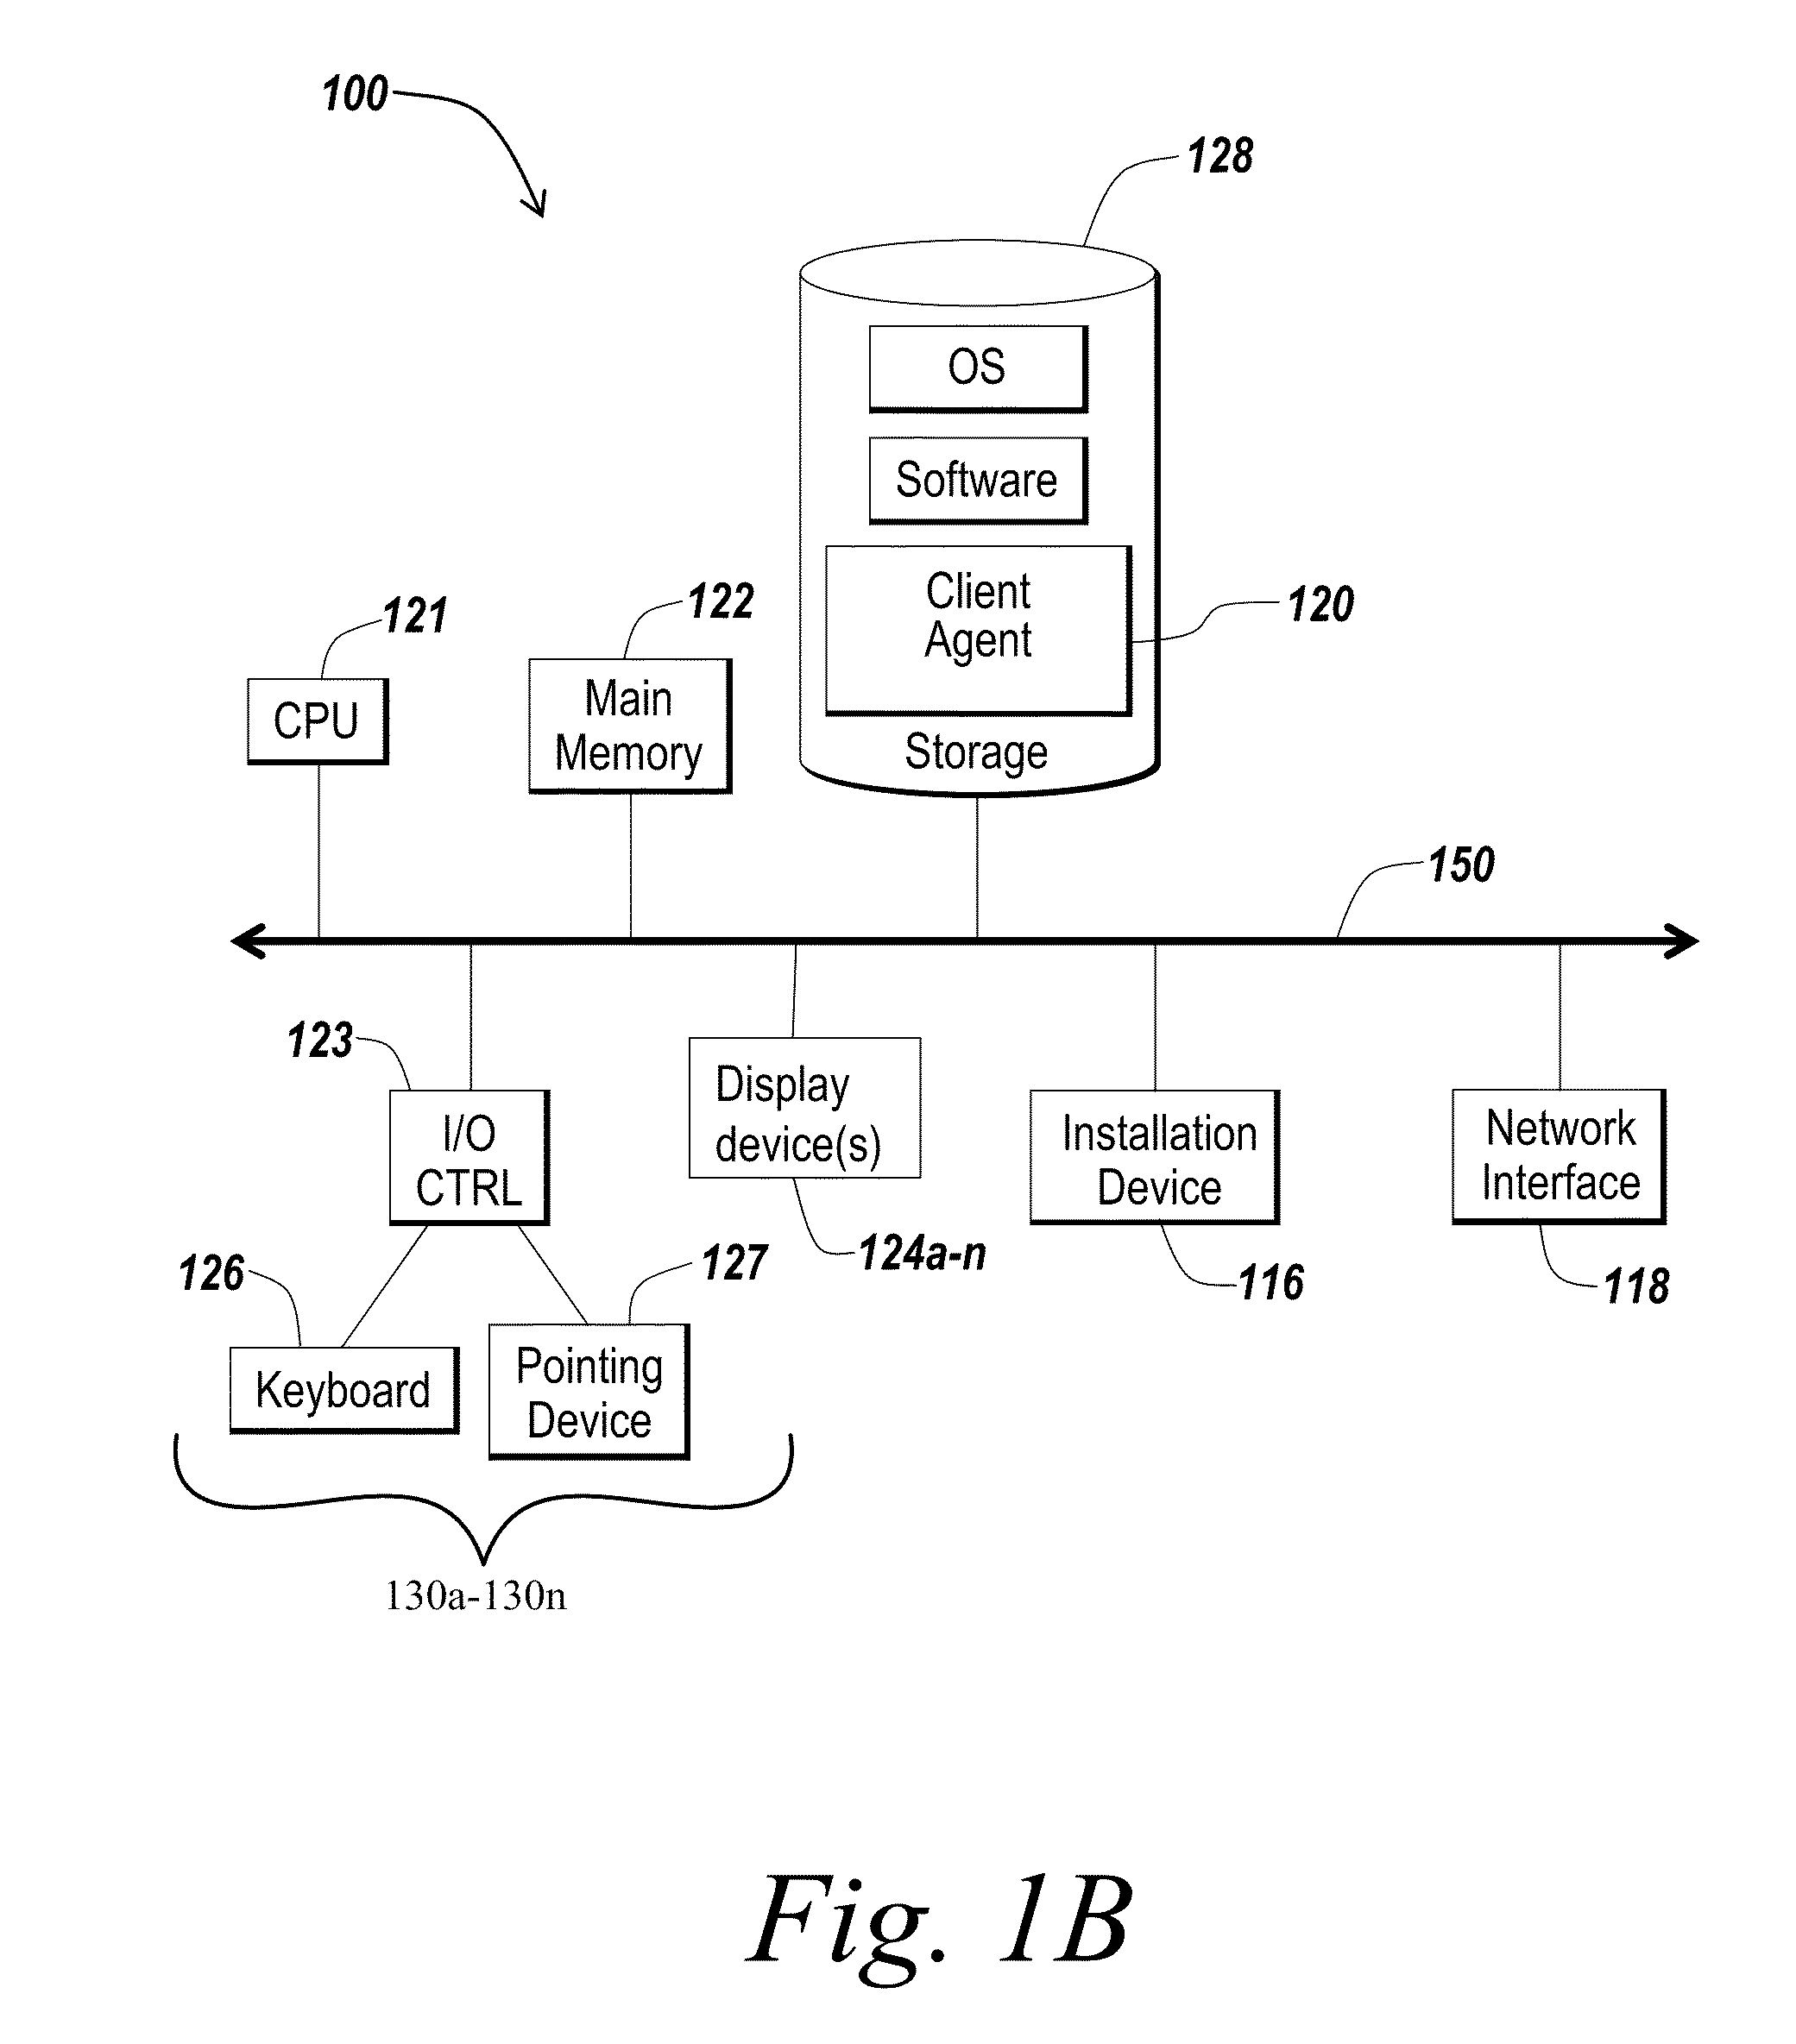 Systems and methods for analyzing changes in application code from a previous instance of the application code